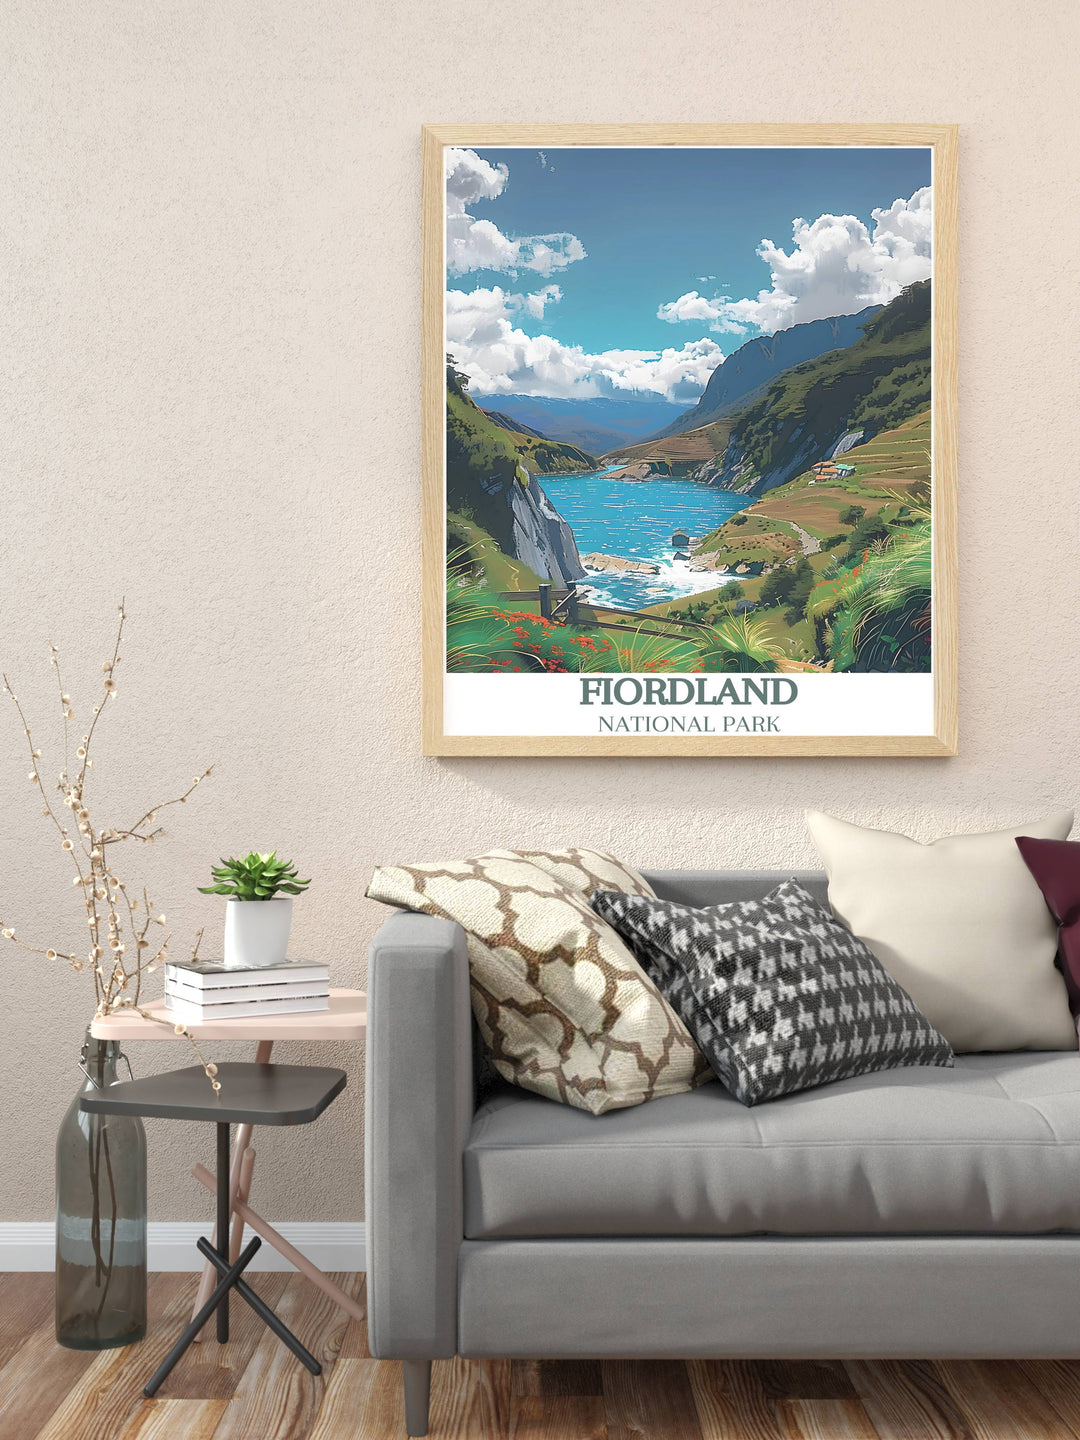 Snowy scenes on The Routeburn Track, highlighting the serene beauty of Fiordlands winter landscape, featured in a custom wall print.